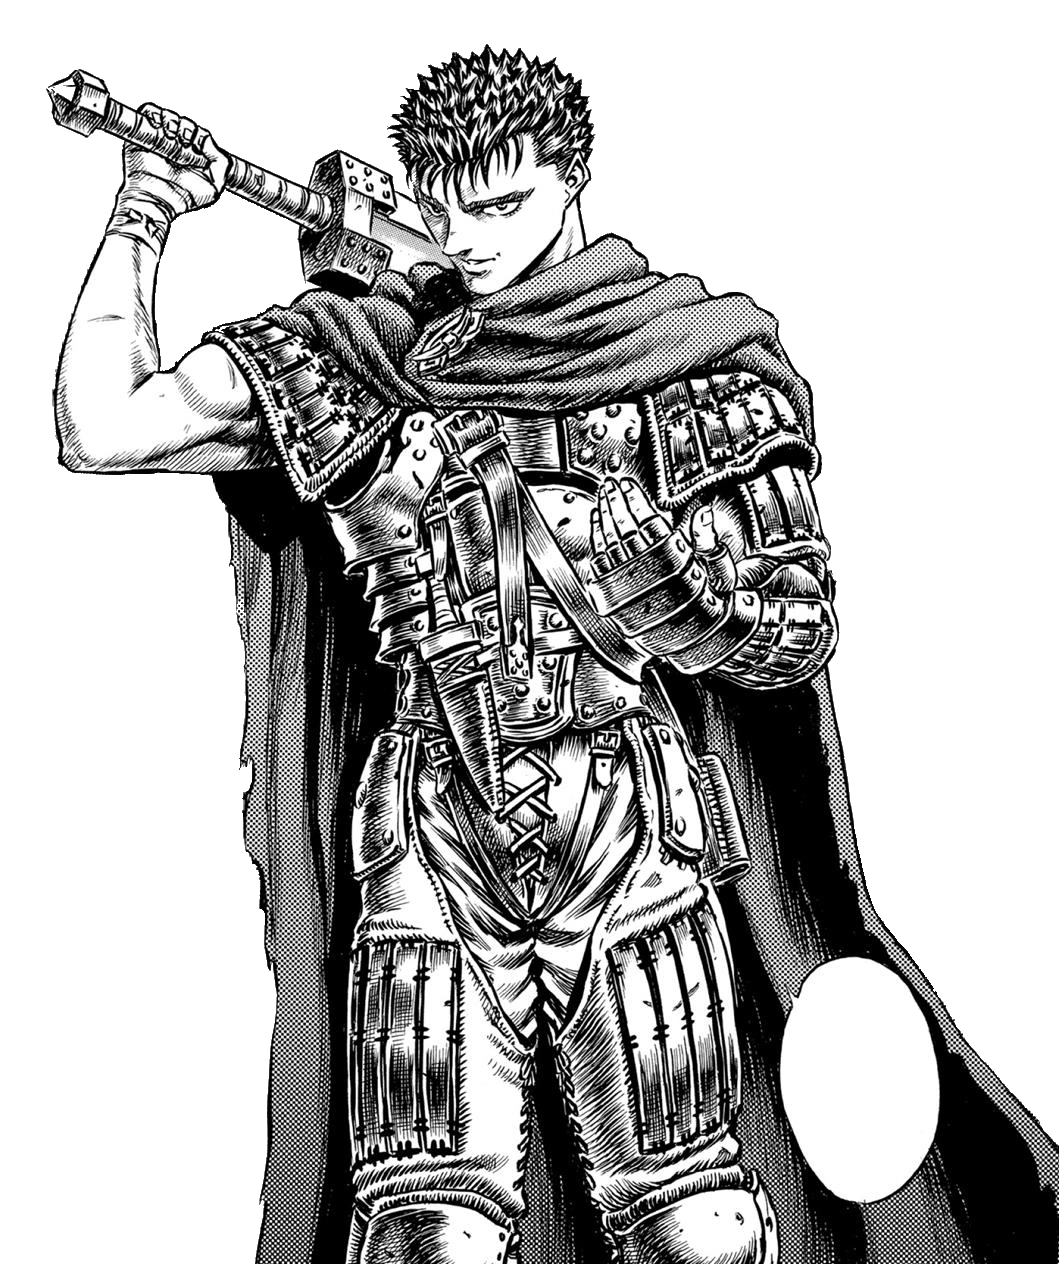 Now here is Guts in different manga styles, by me. What do you